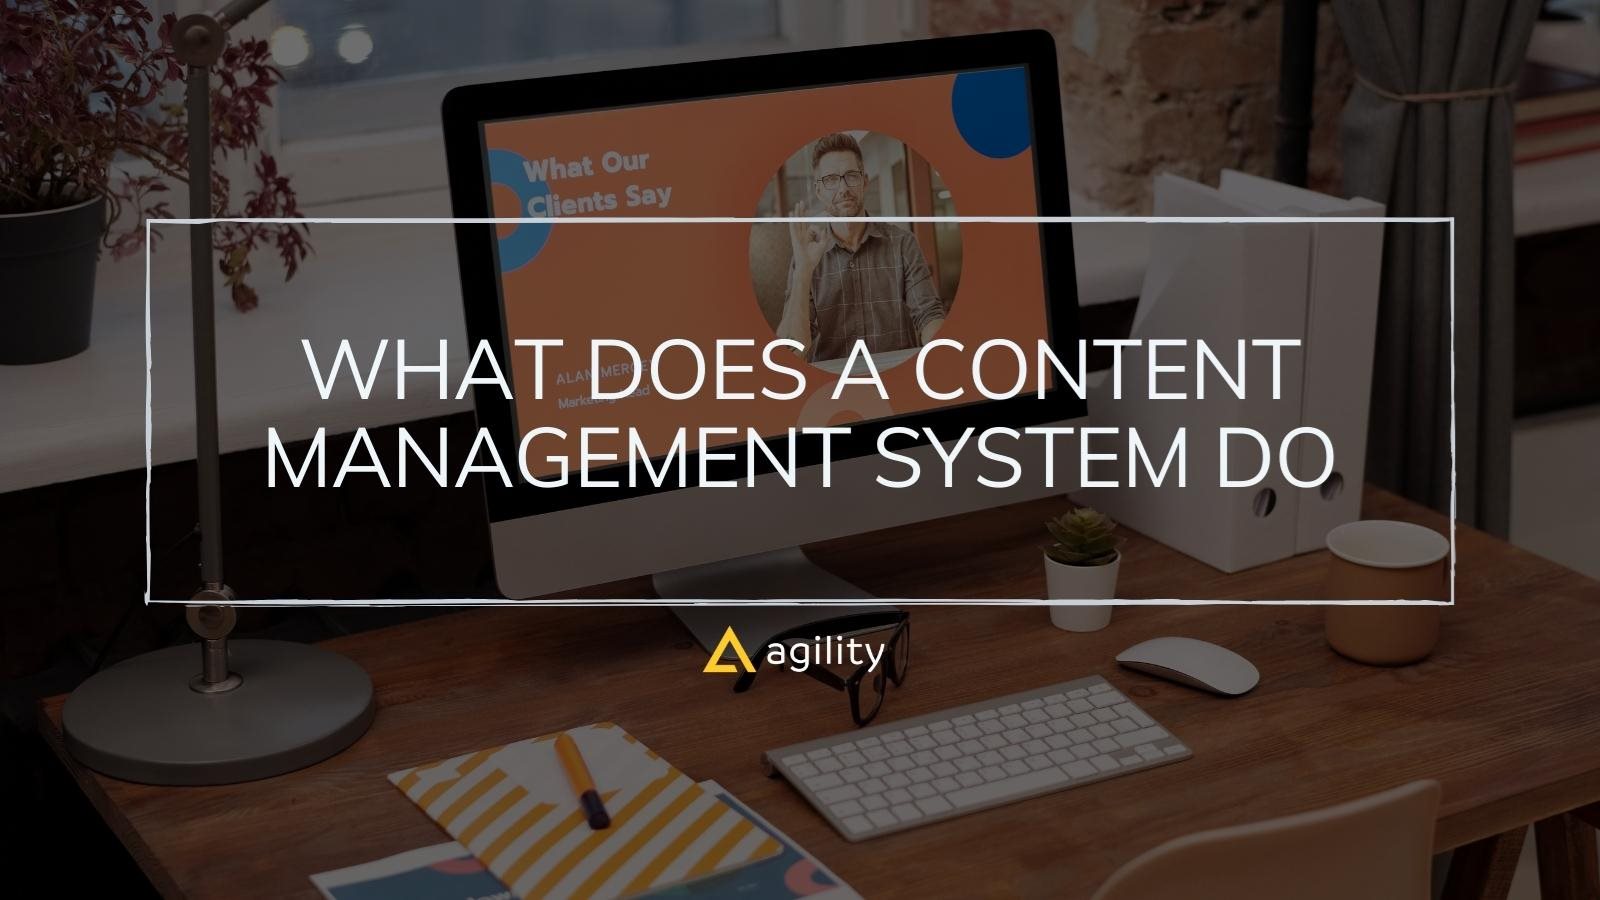 What Does a Content Management System Do